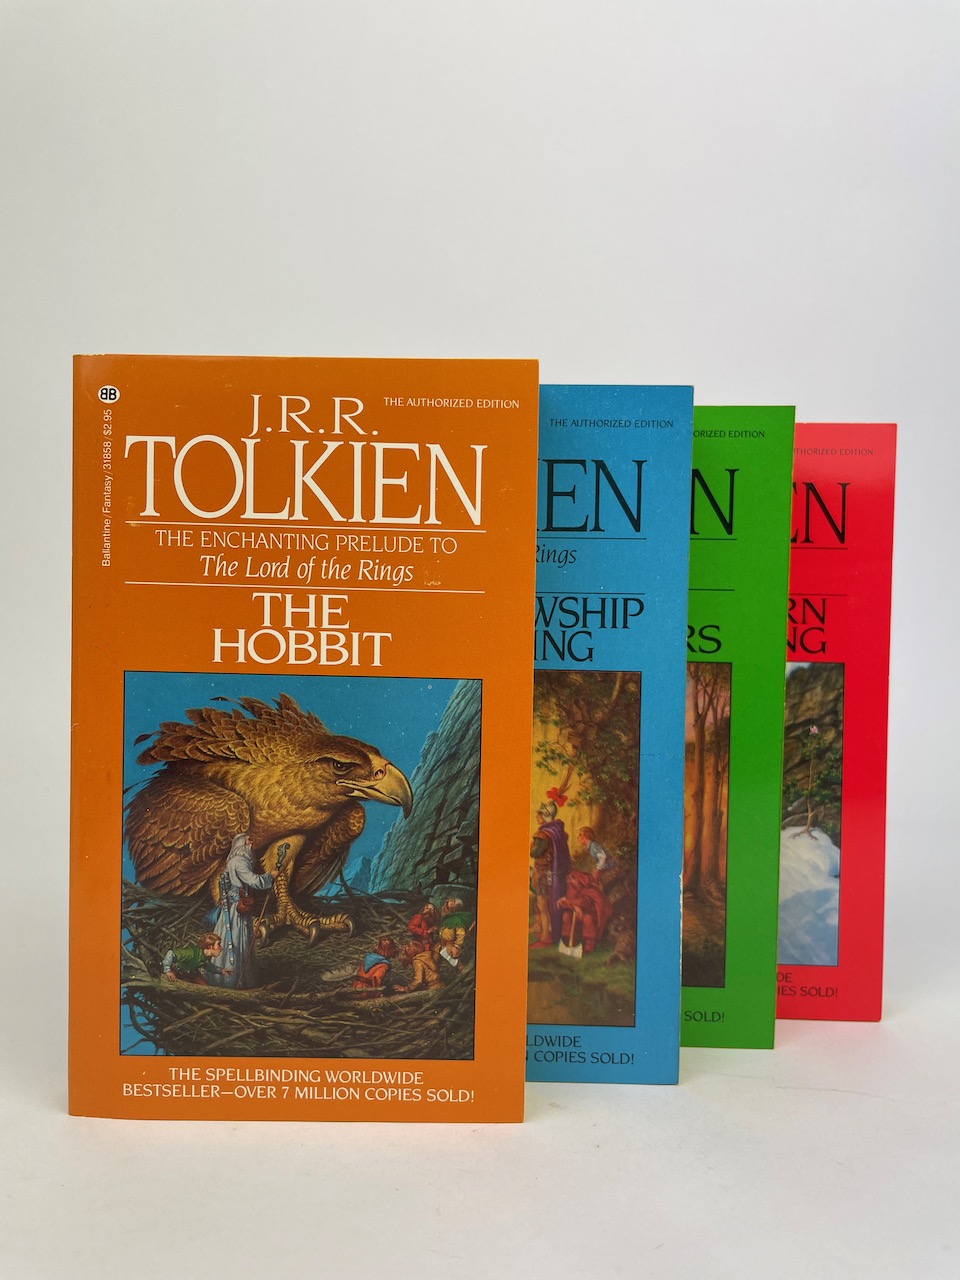 The Lord of the Rings and The Hobbit set from 1984, by Ballantine Books, New York 12